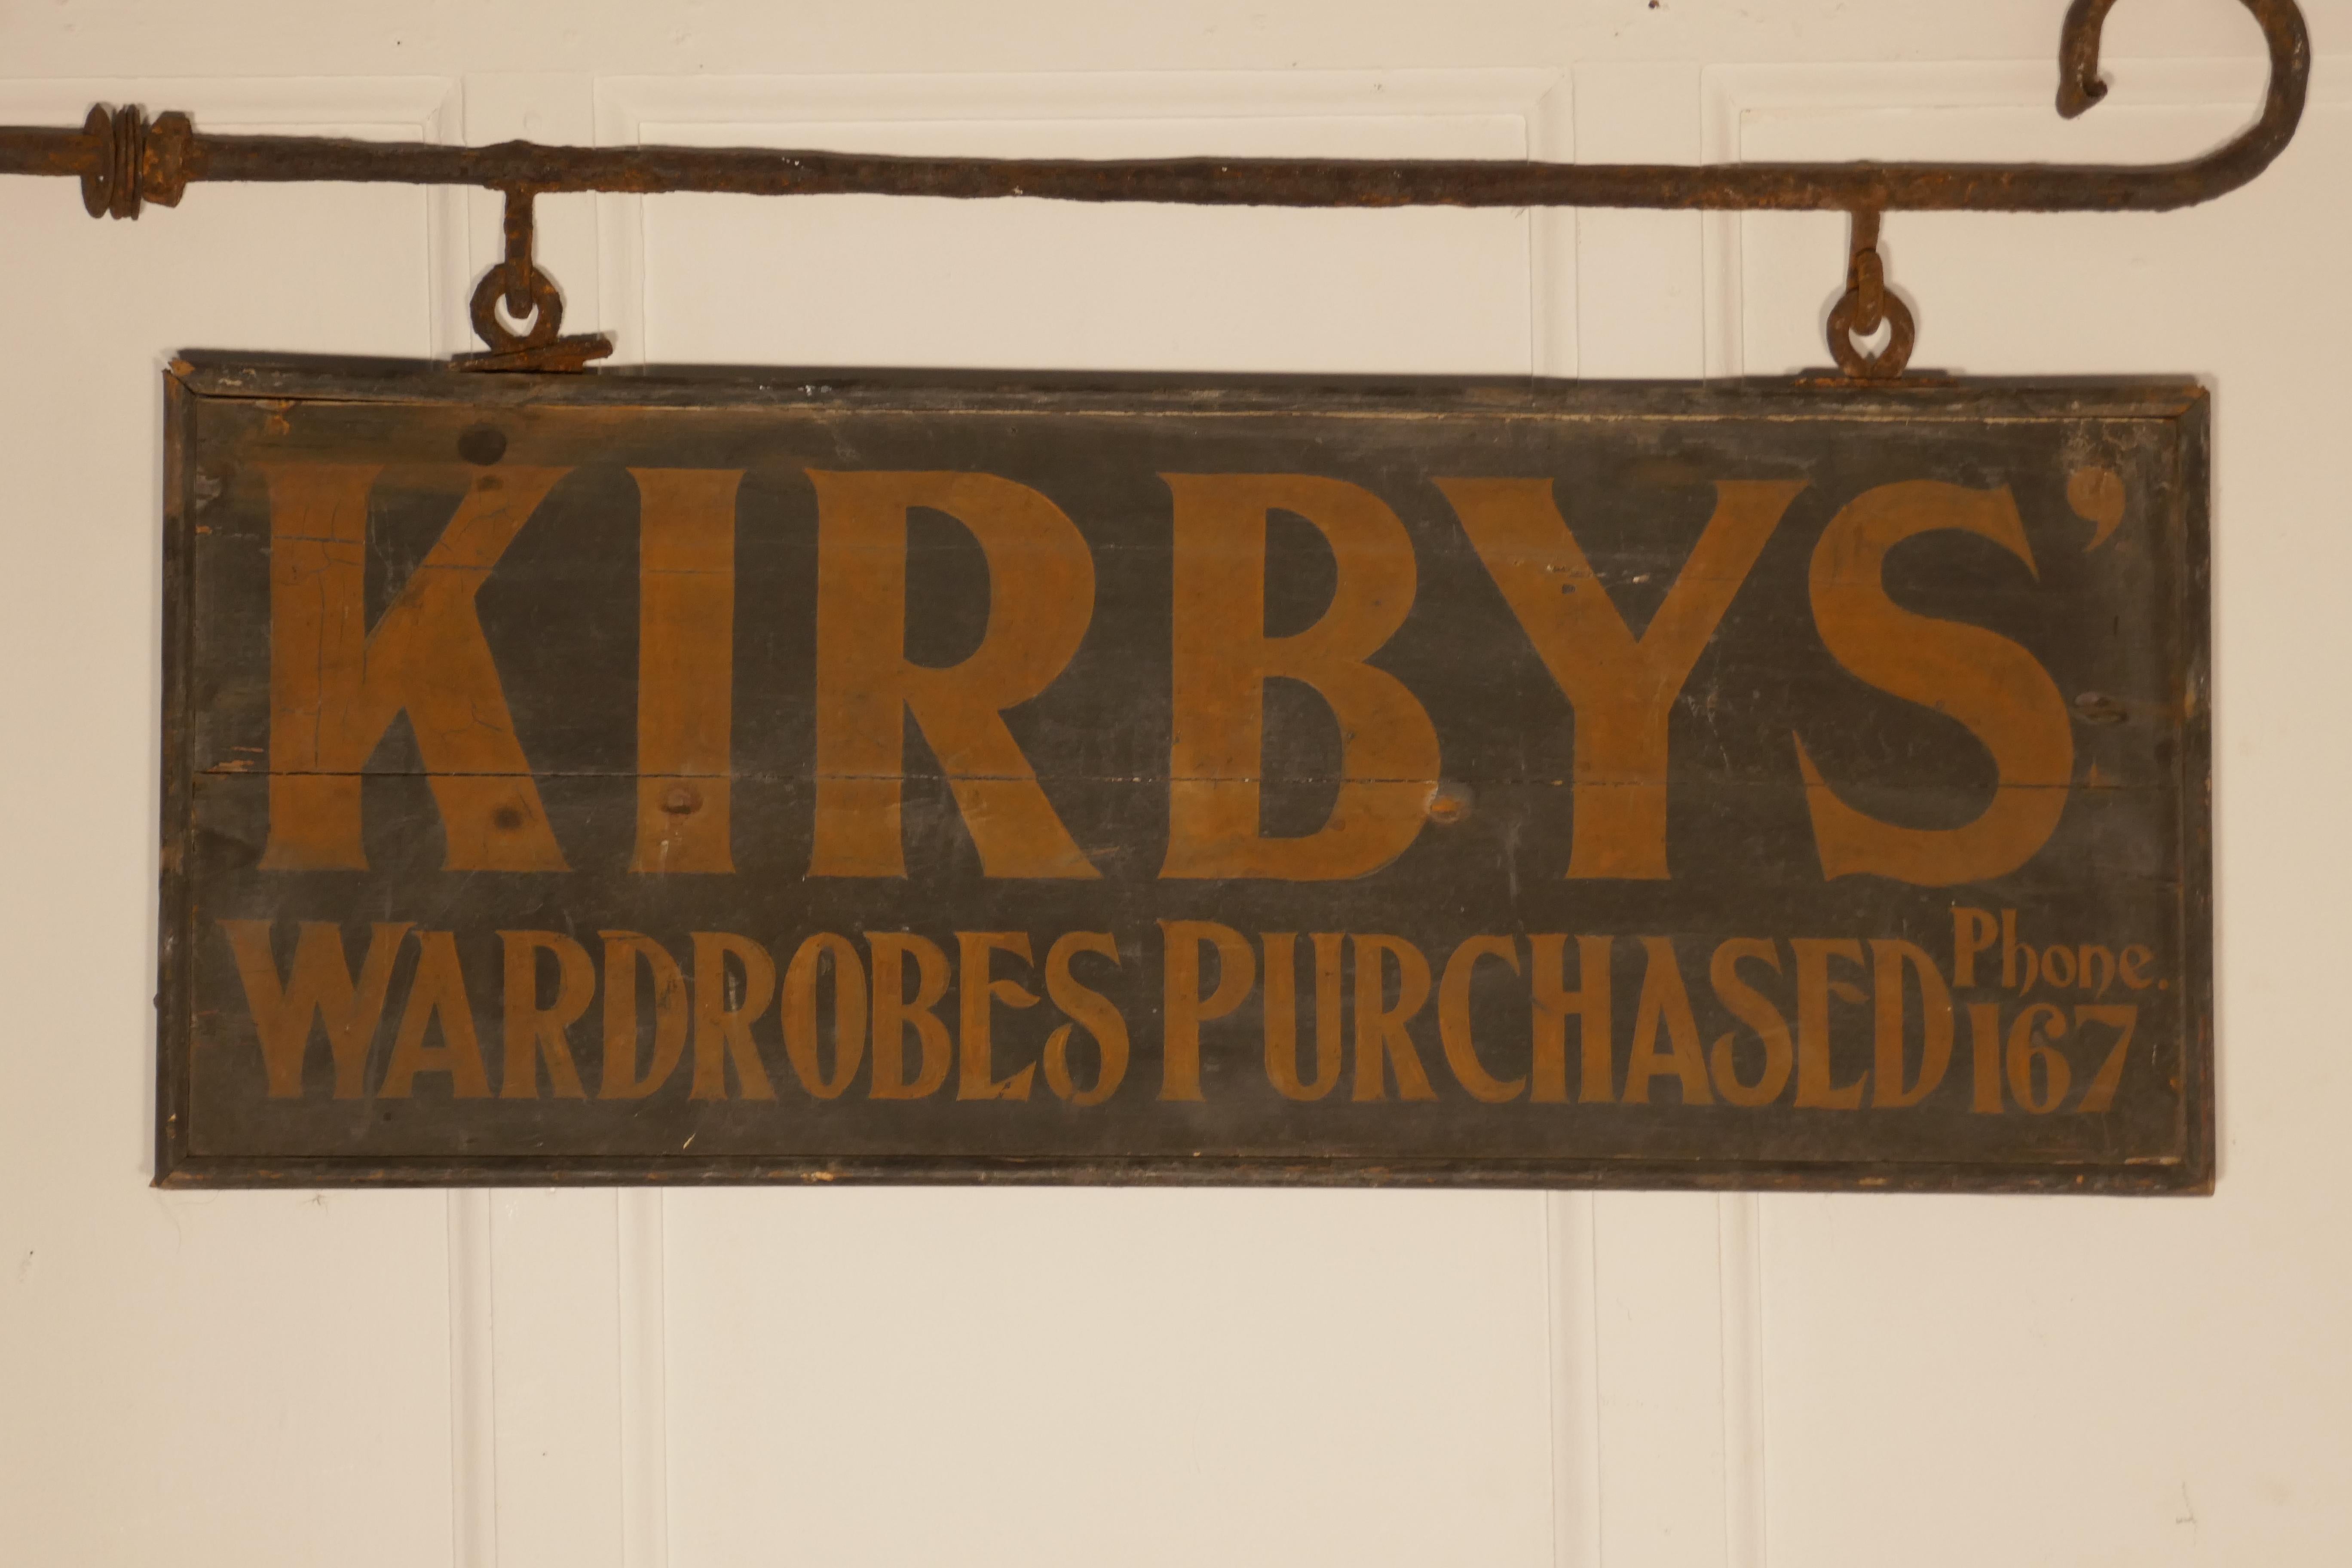 Edwardian wall hung shop sign, Kirbys’ wardrobes purchased

A great piece of social history, this is a wooden sign painted on both sides and hanging on a blacksmith made Iron bracket, still in use in the 1930s when the phone number was squeezed in